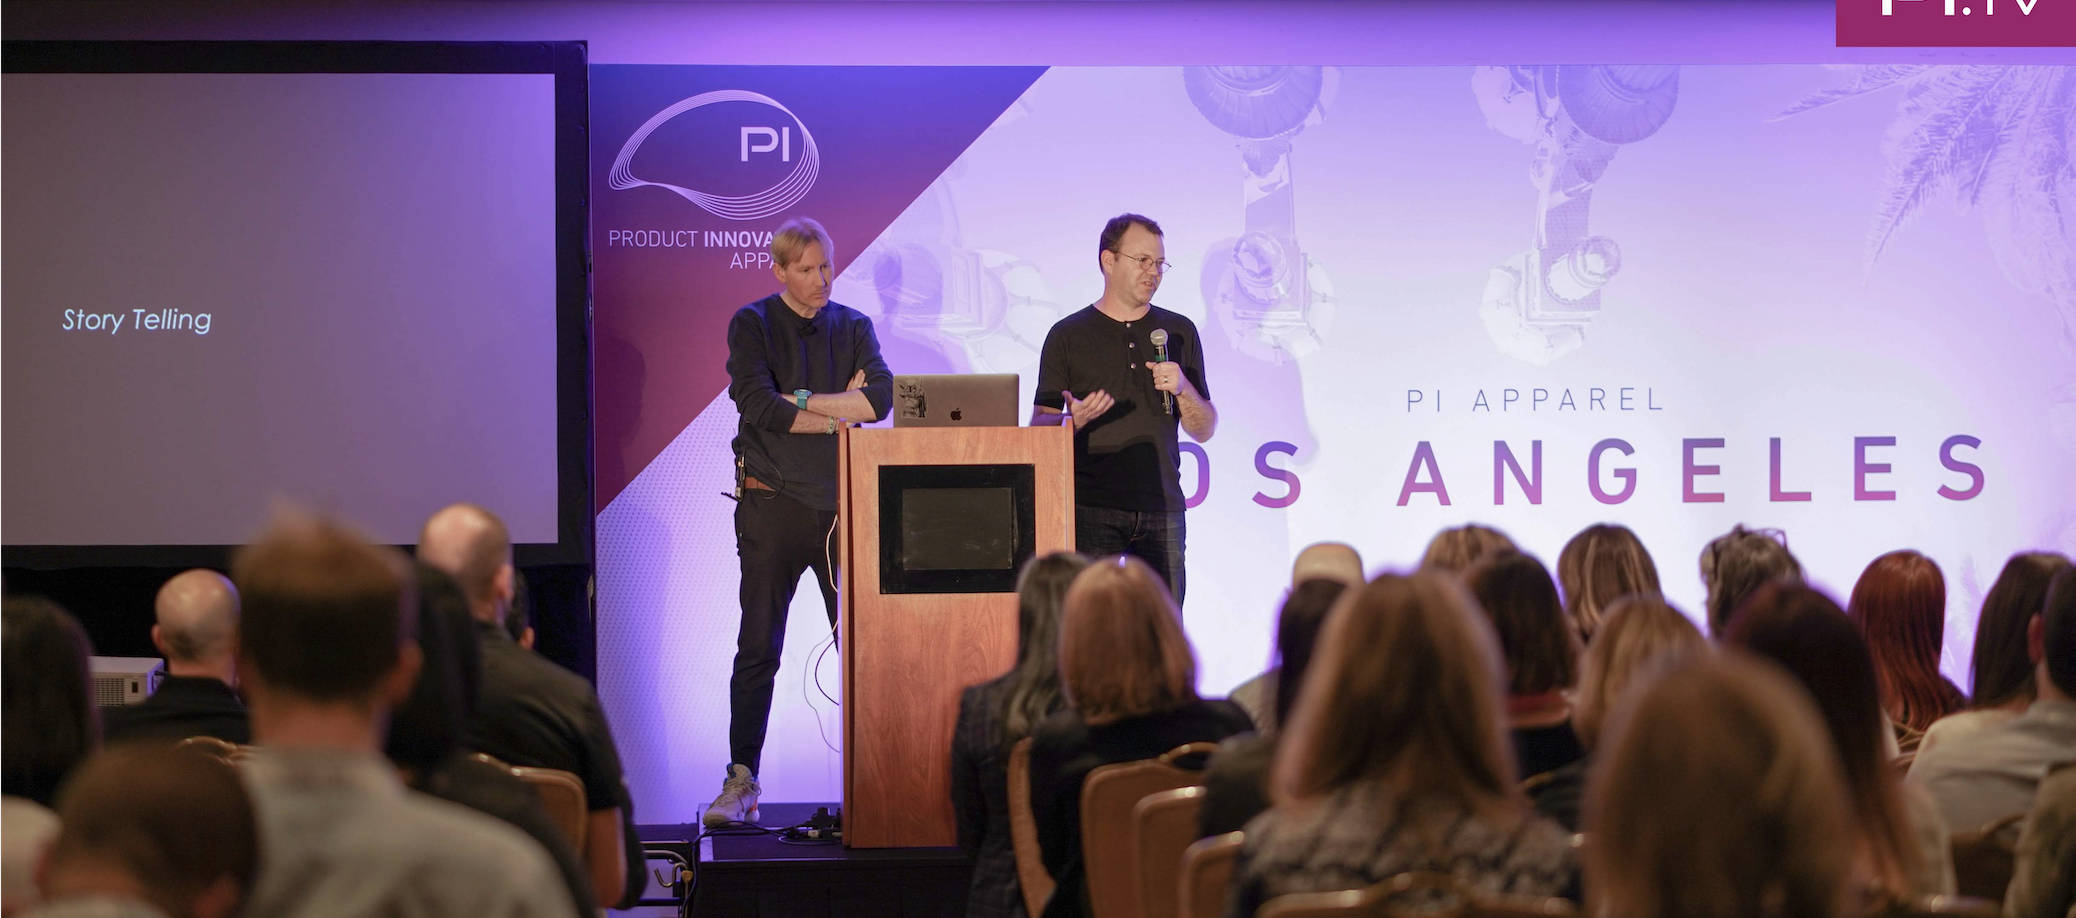 Matthew drinkwater guest speaking on behalf of Fashion Innovation Agency At PI Apparel